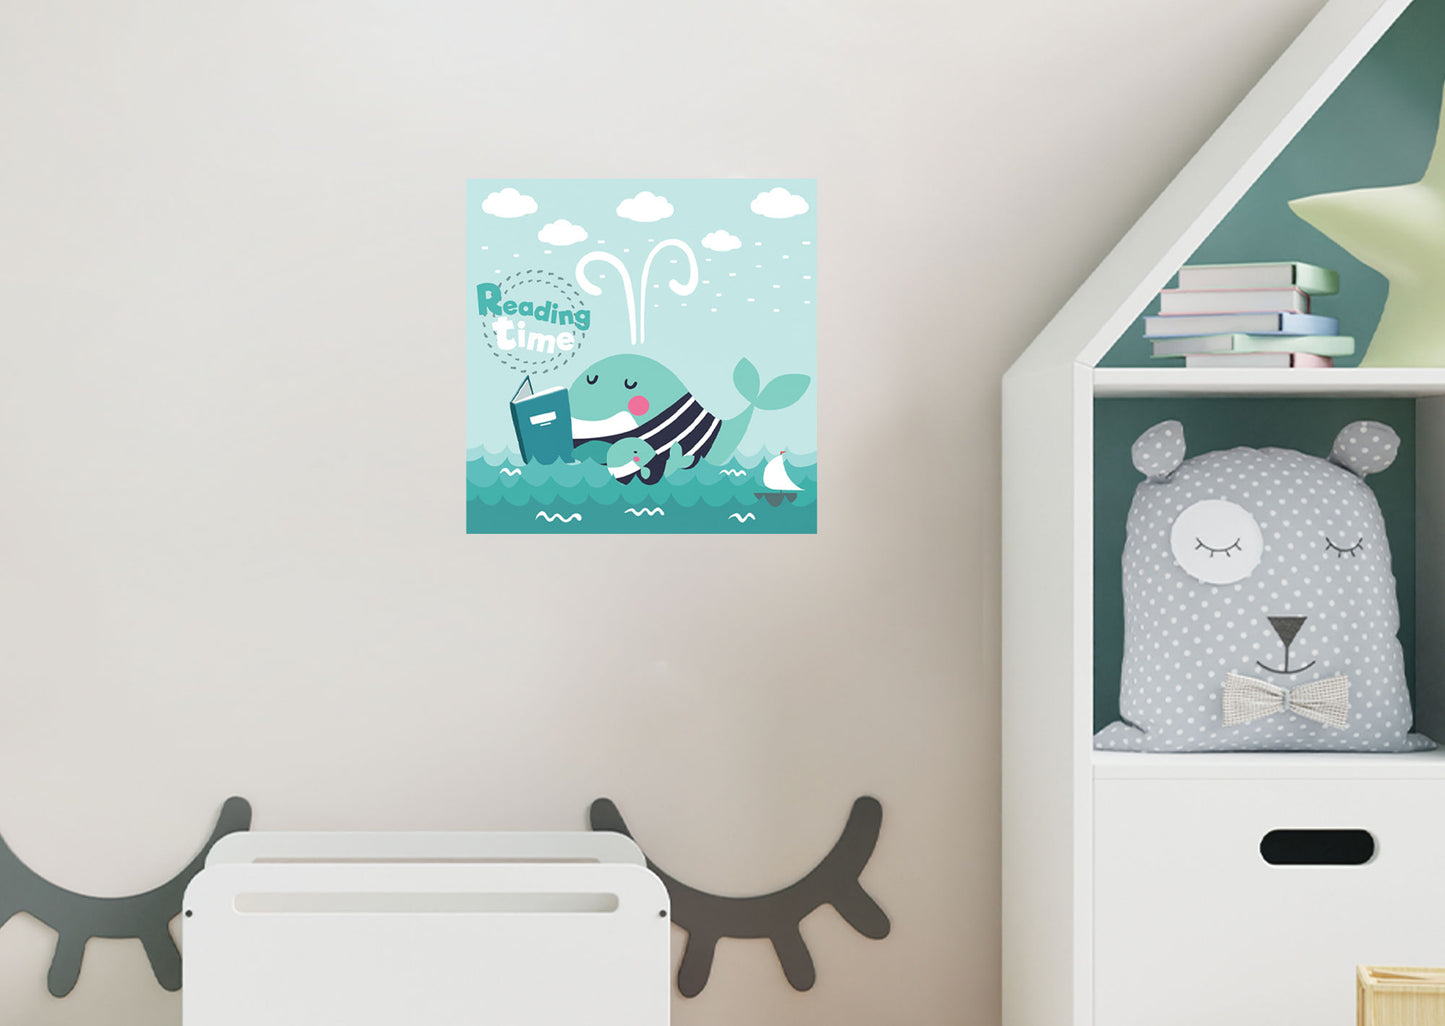 Nursery:  Reading Time Mural        -   Removable Wall   Adhesive Decal